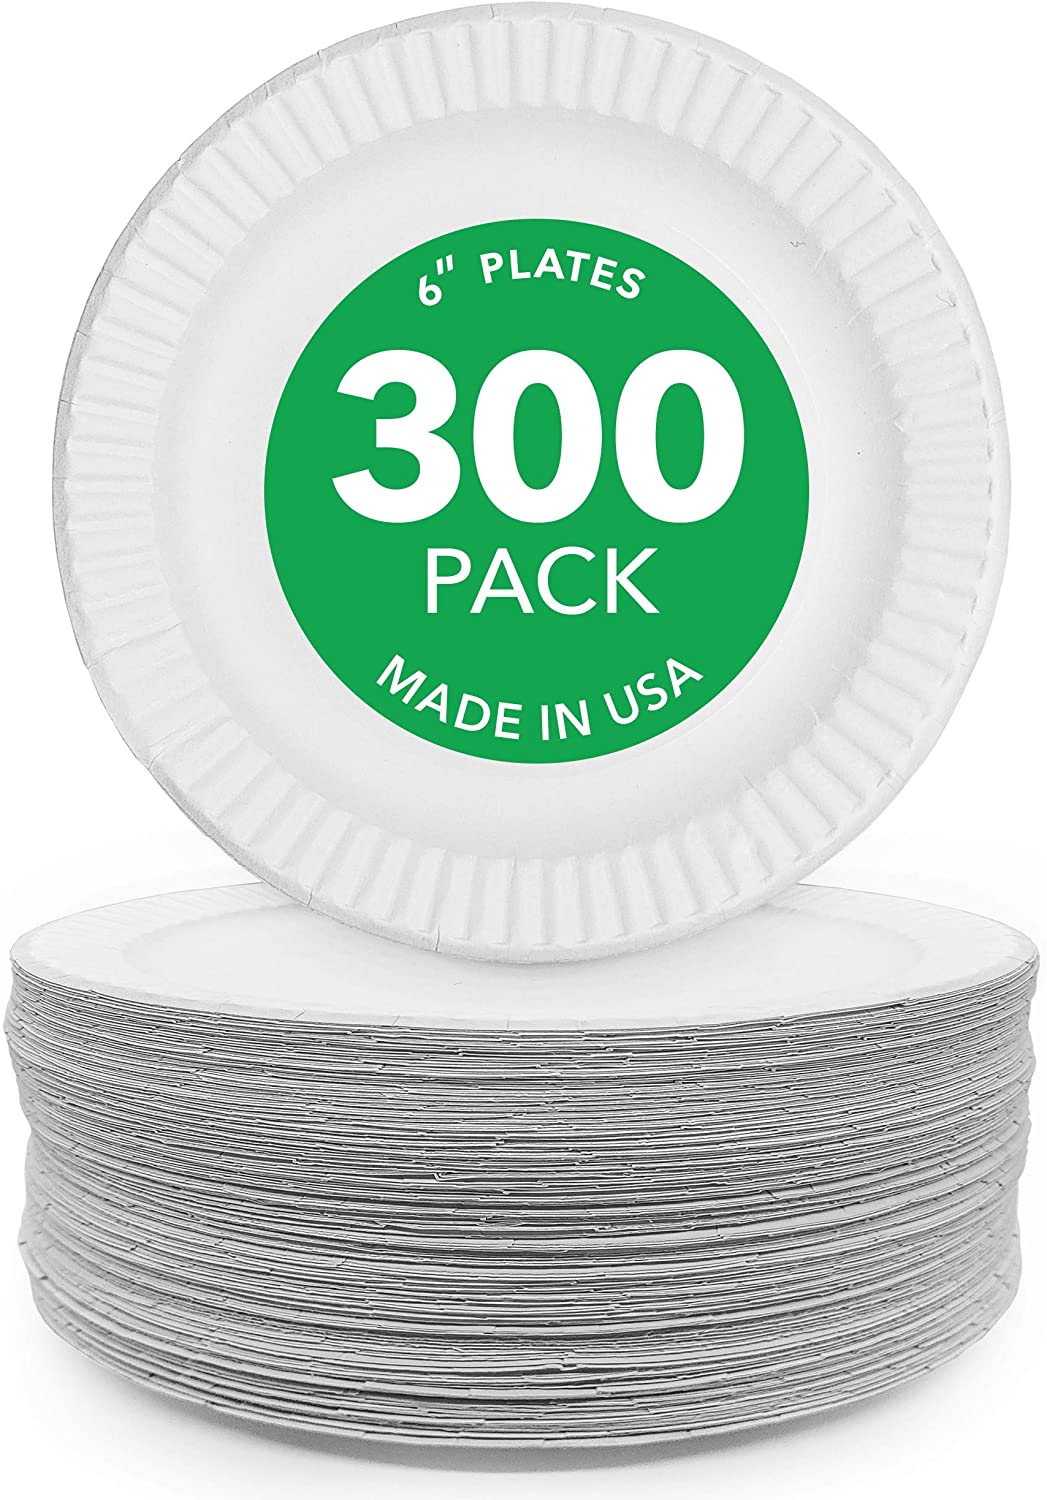 Comfy Package 9 Inch Paper Plates Bulk Pack White Disposable Plates Heavy  Duty, 300-Pack 